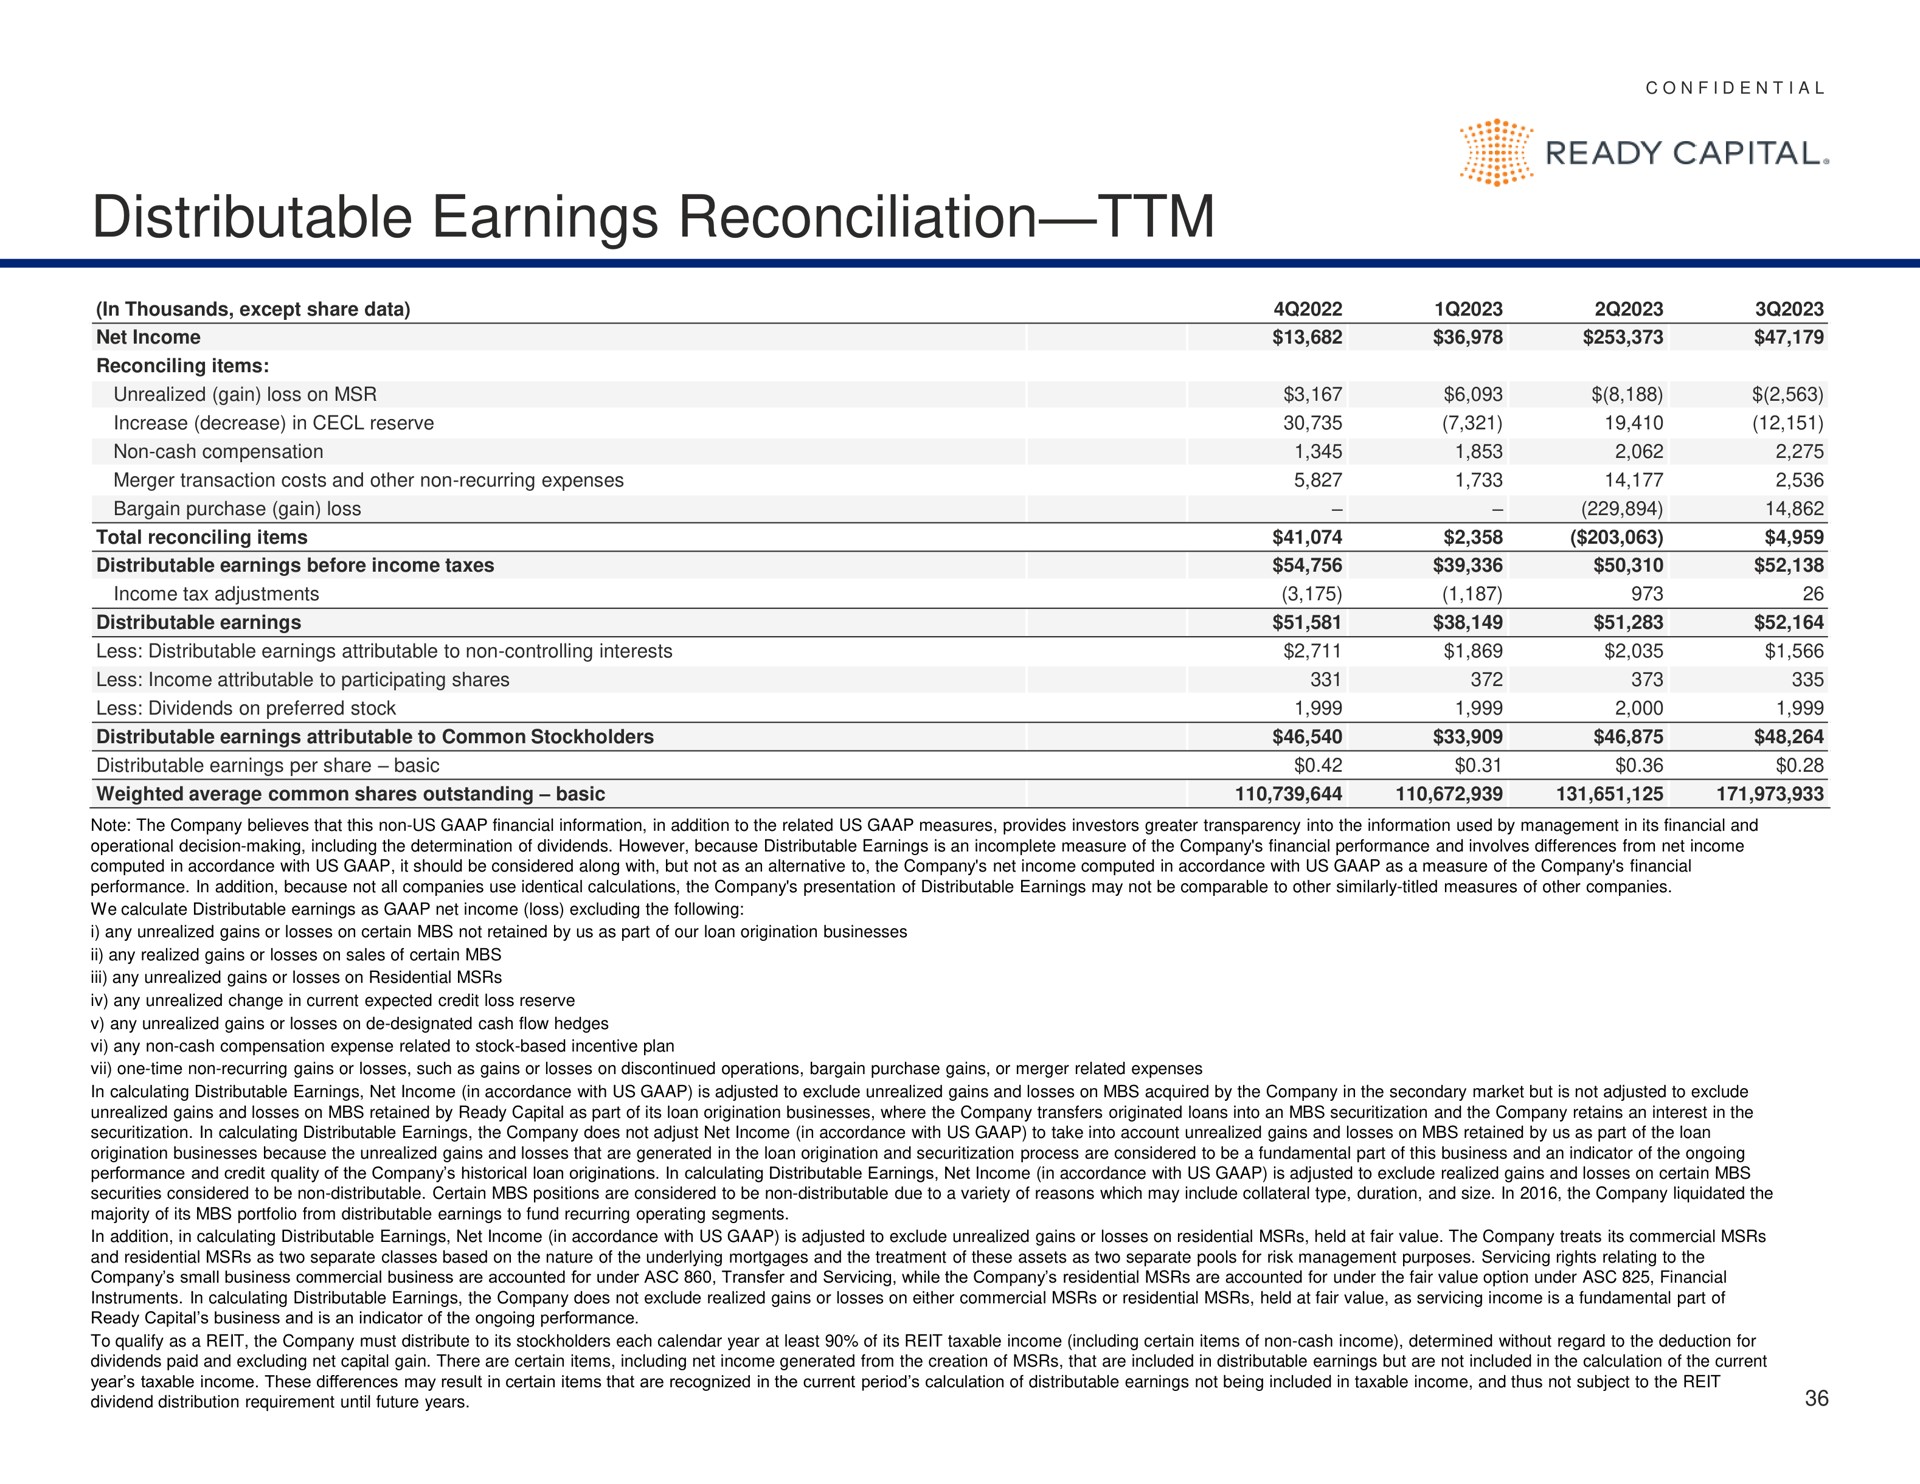 distributable earnings reconciliation | Ready Capital